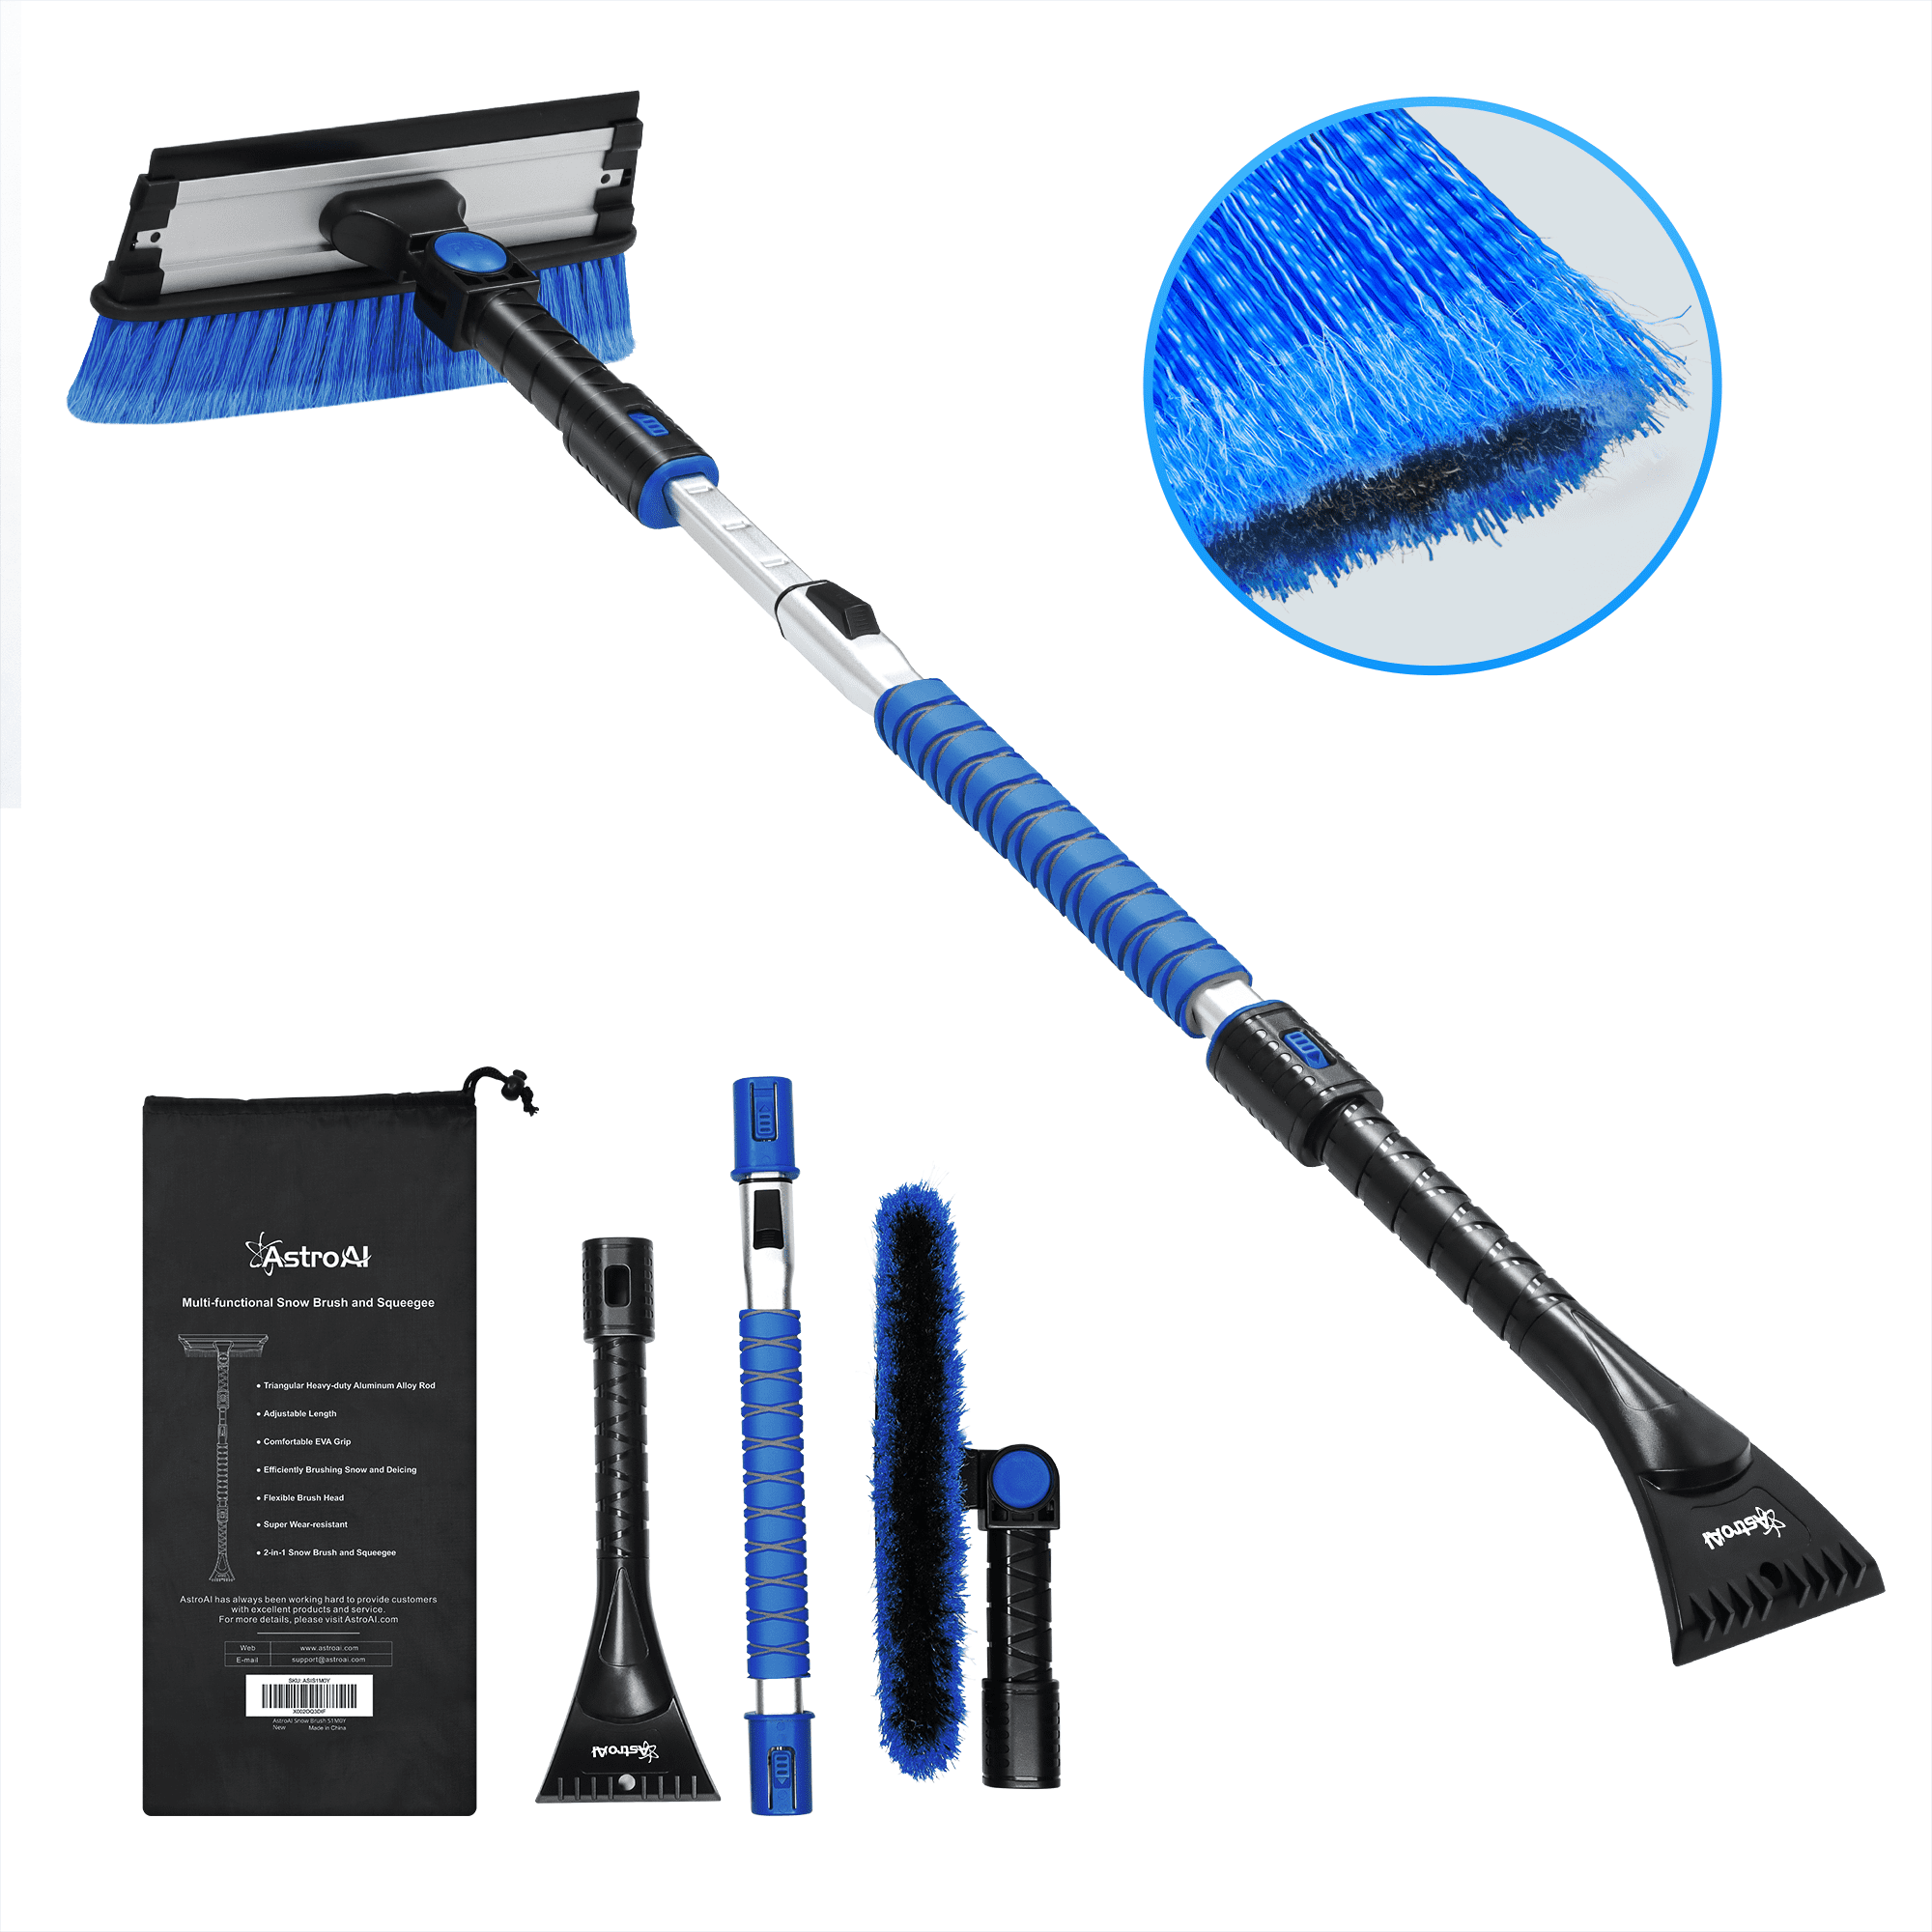 AstroAI 47.2 Inch Ice Scraper Extendable Car Snow Brush, Blue with